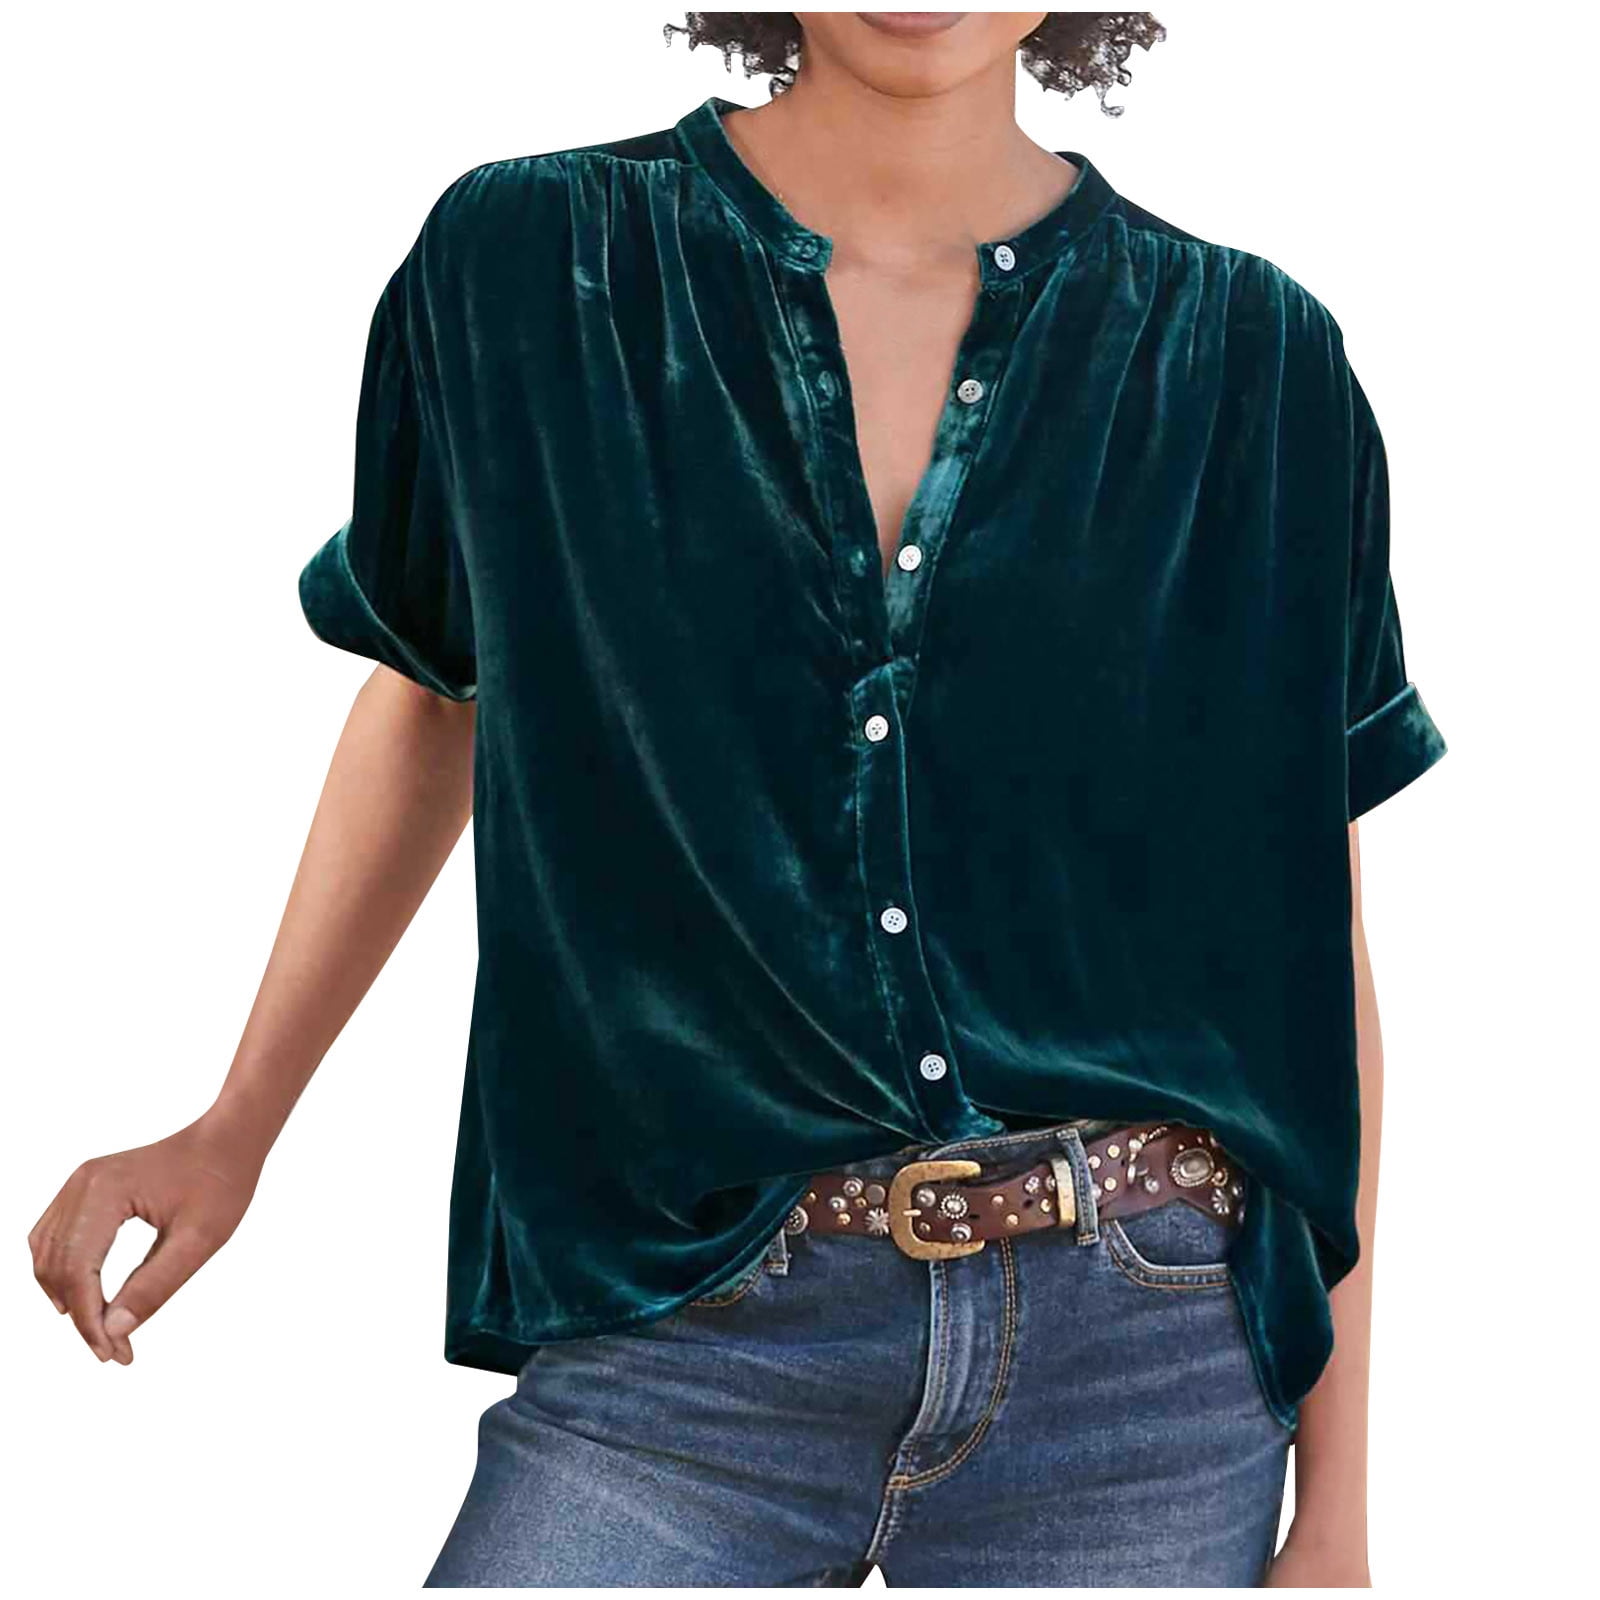 Besolor Womens Summer Velvet Tops Short Sleeve Button down Casual Tops  Shirts Soft Womens Tunic Blouses for Work Green